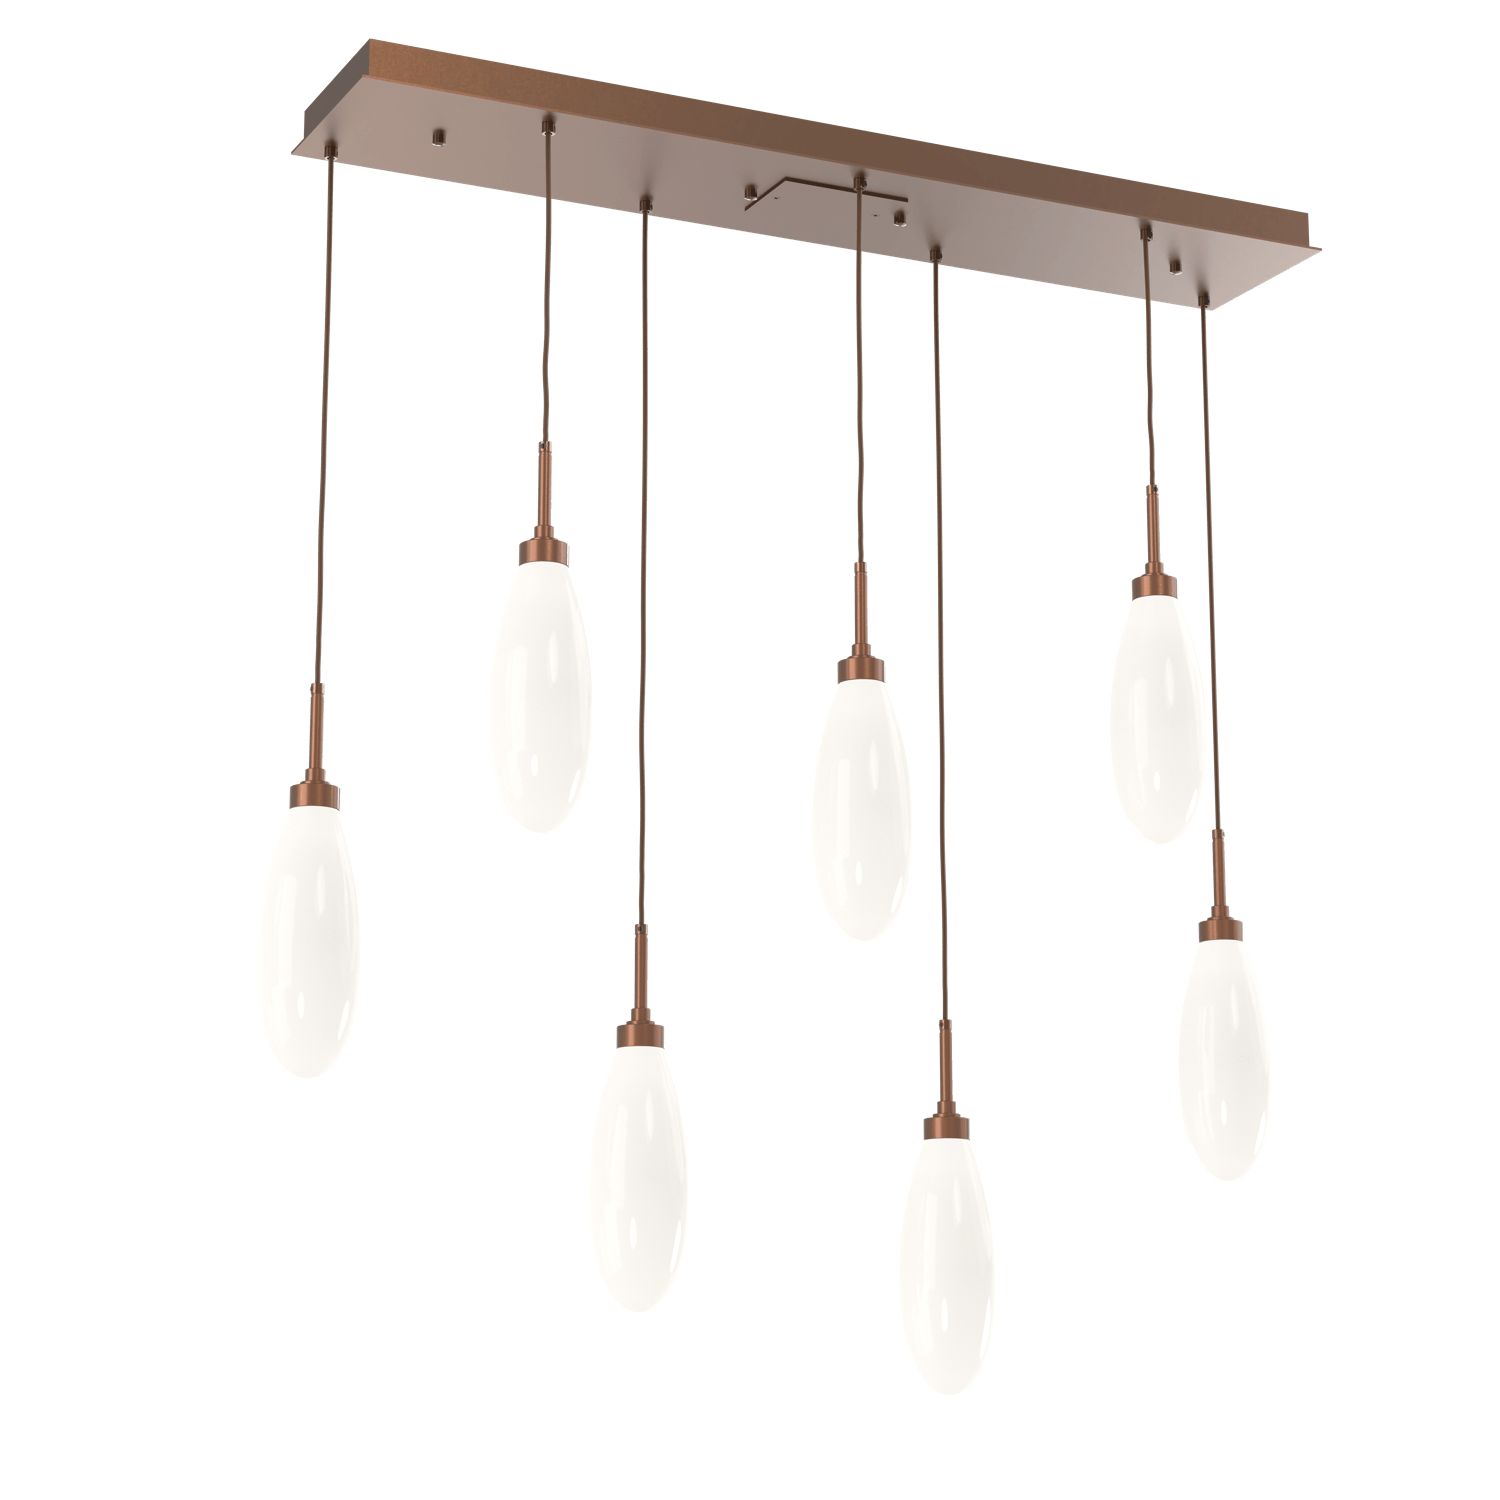 PLB0071-07-BB-WL-LL-Hammerton-Studio-Fiori-7-light-linear-pendant-chandelier-with-burnished-bronze-finish-and-opal-white-glass-shades-and-LED-lamping